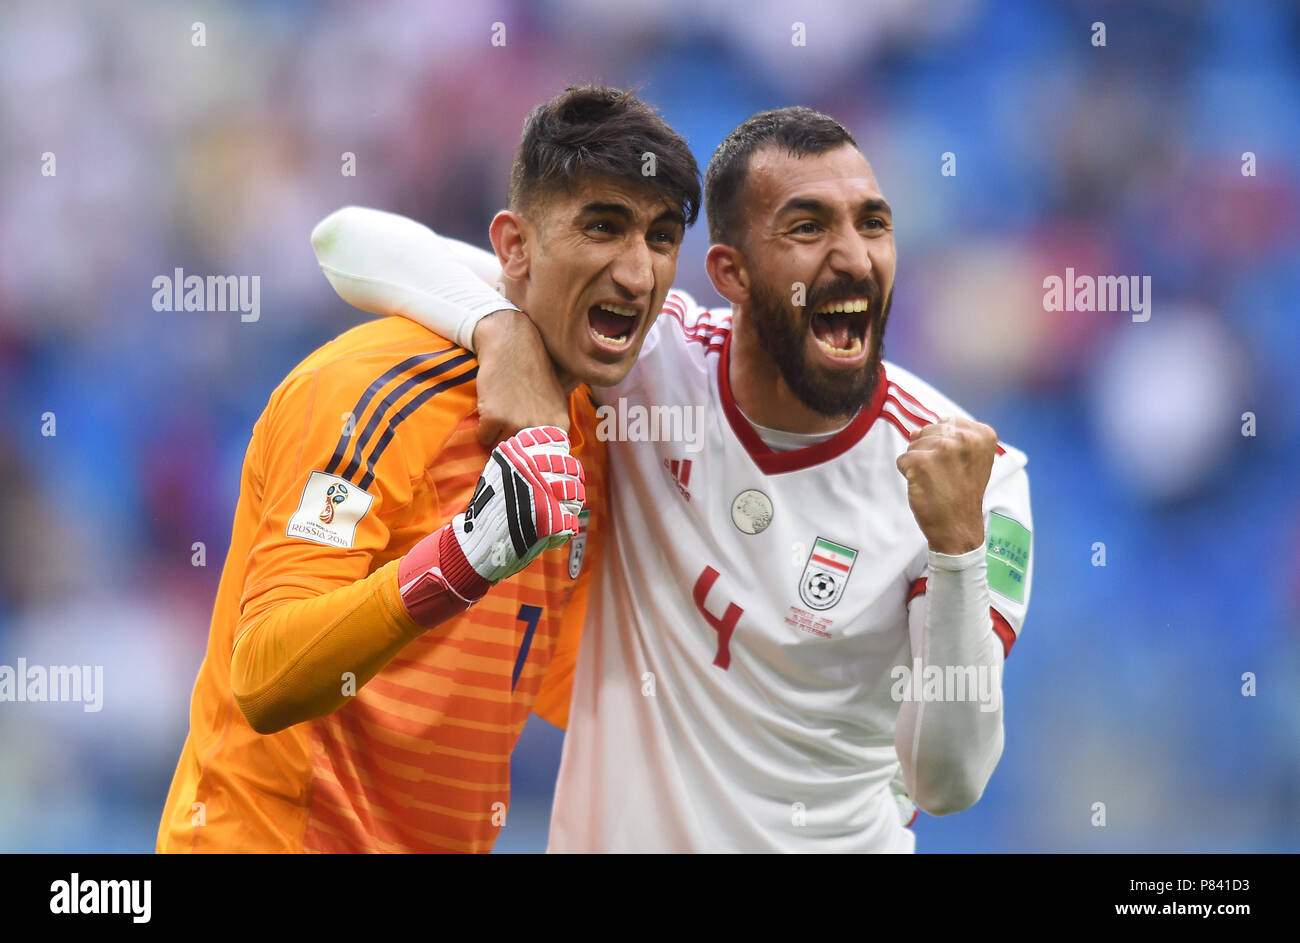 SAINT PETERSBURG, RUSSIA - JUNE 15: Ali Beiranvand and Roozbeh Cheshmi of IR Iran celebrate at full time during during the 2018 FIFA World Cup Russia group B match between Morocco and Iran at Saint Petersburg Stadium on June 15, 2018 in Saint Petersburg, Russia. (Photo by Lukasz Laskowski/PressFocus/MB Media) Stock Photo